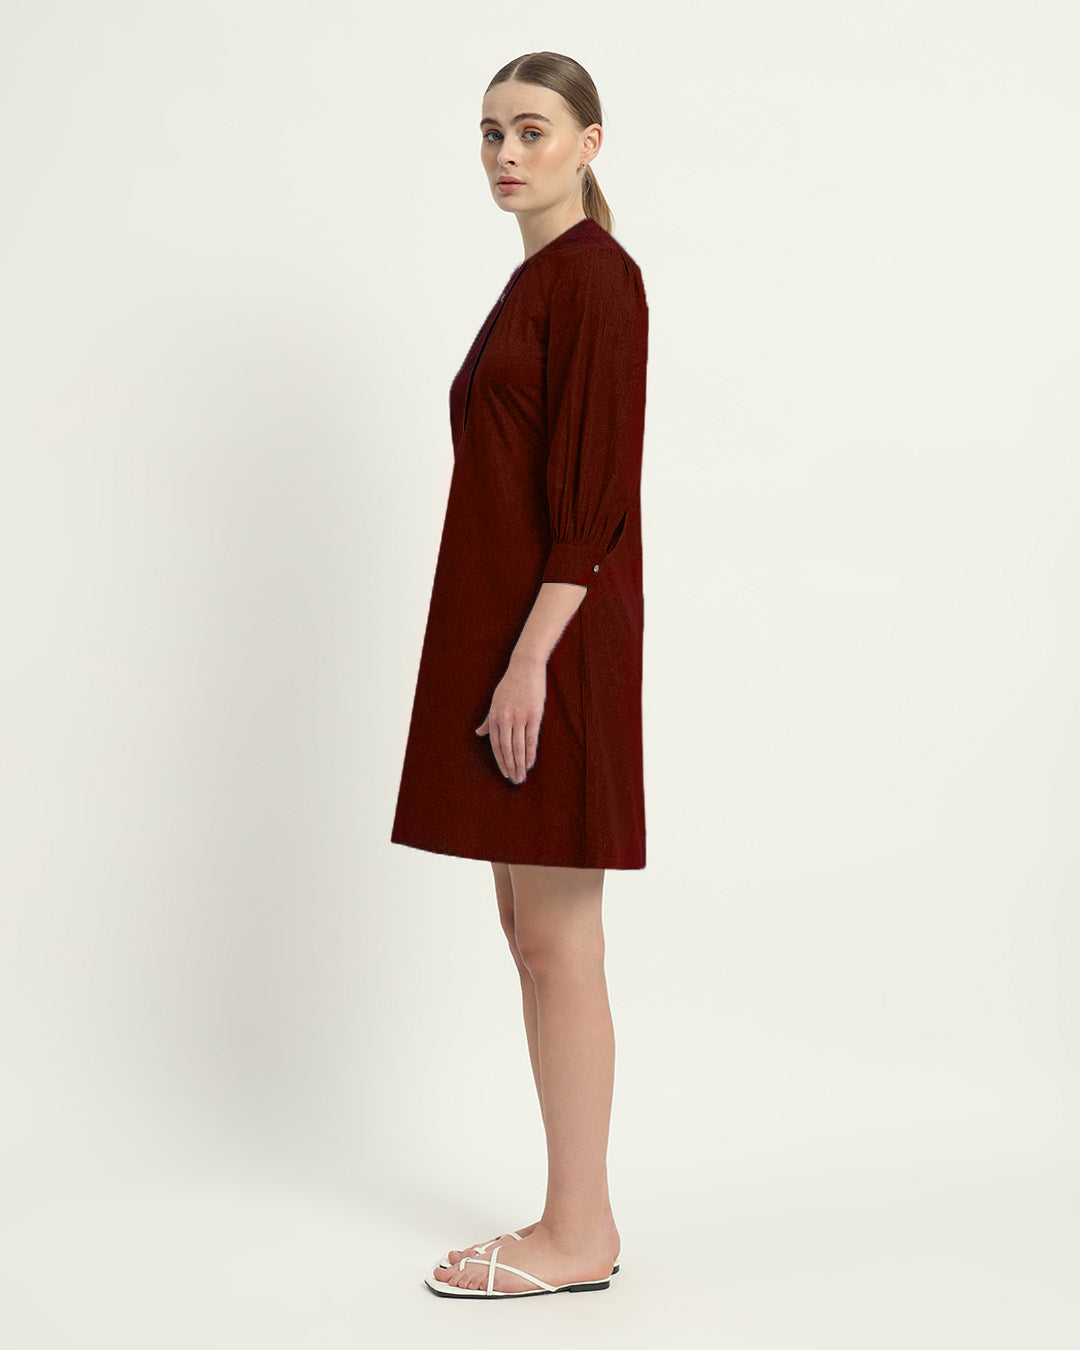 The Rouge Roslyn Cotton Dress